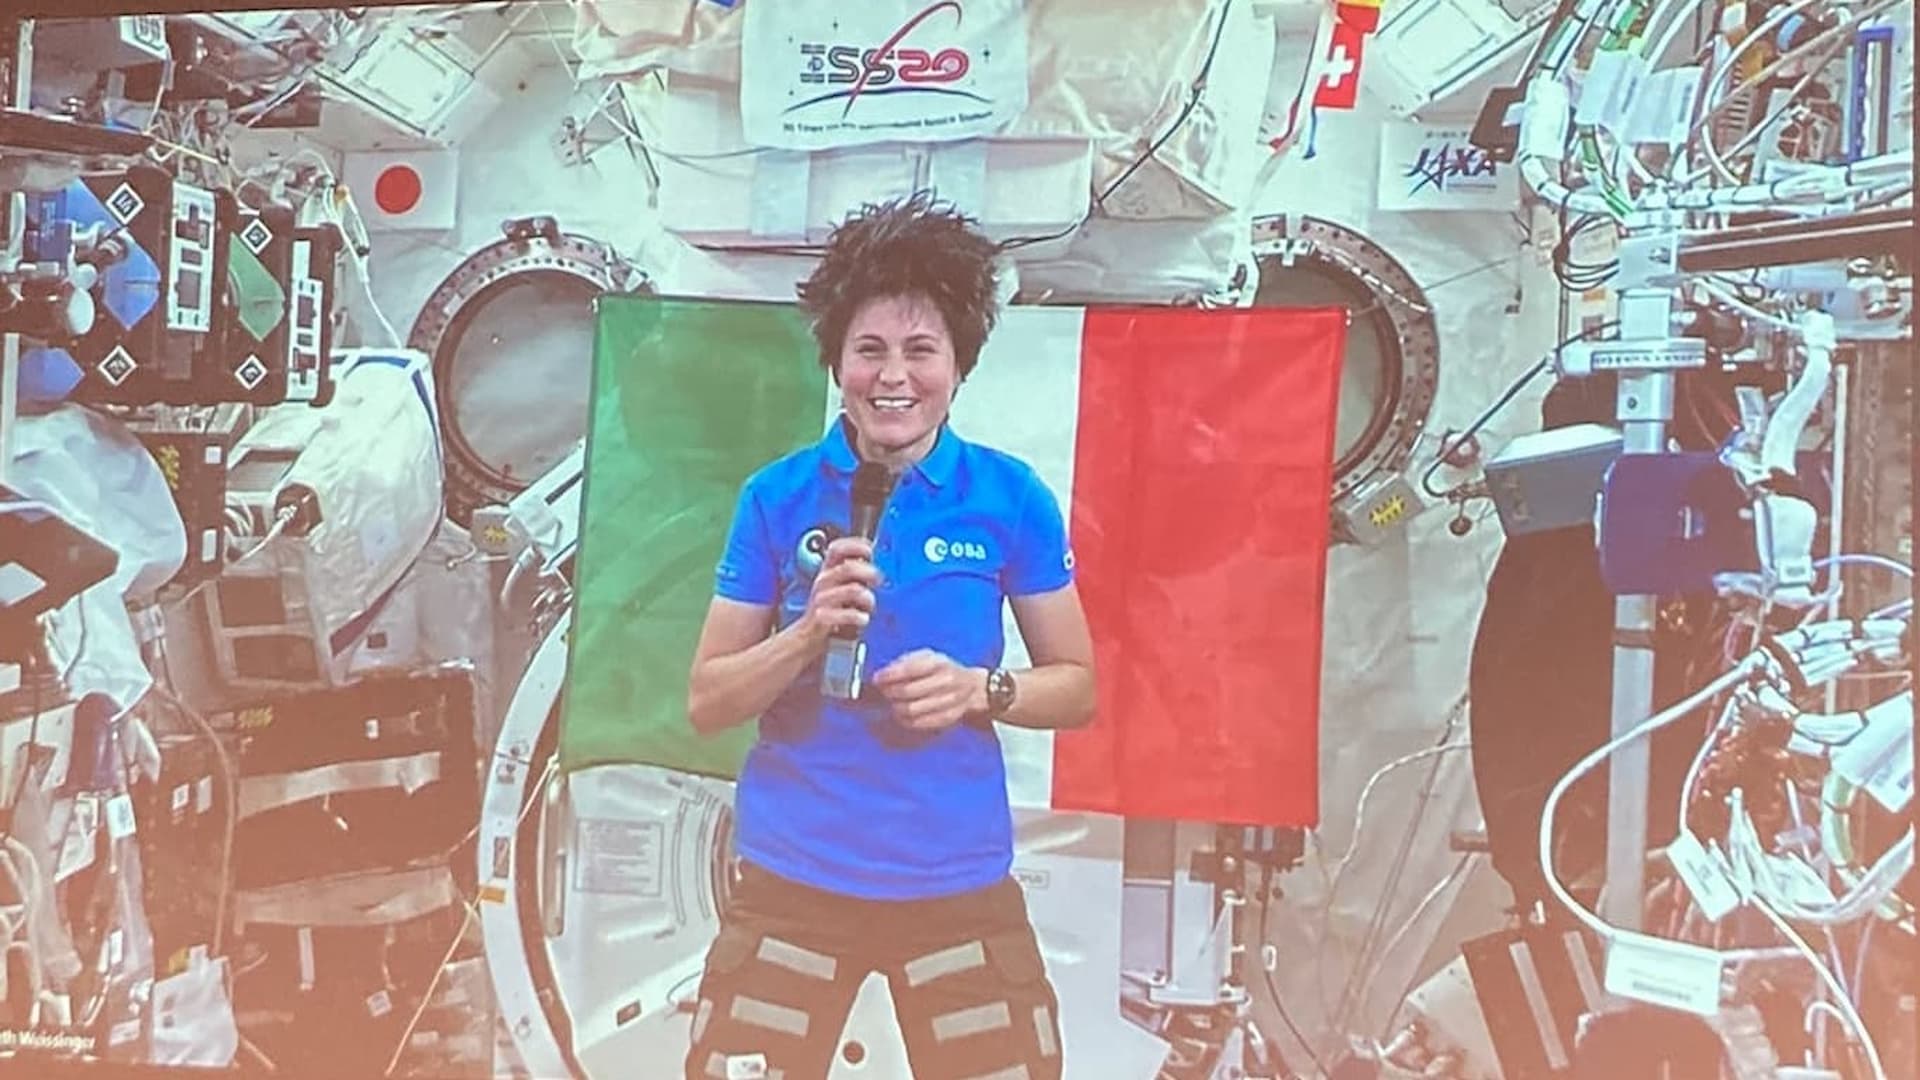 ASI - SECOND MEETING IN SPACE WITH ASTROSAMANTHA